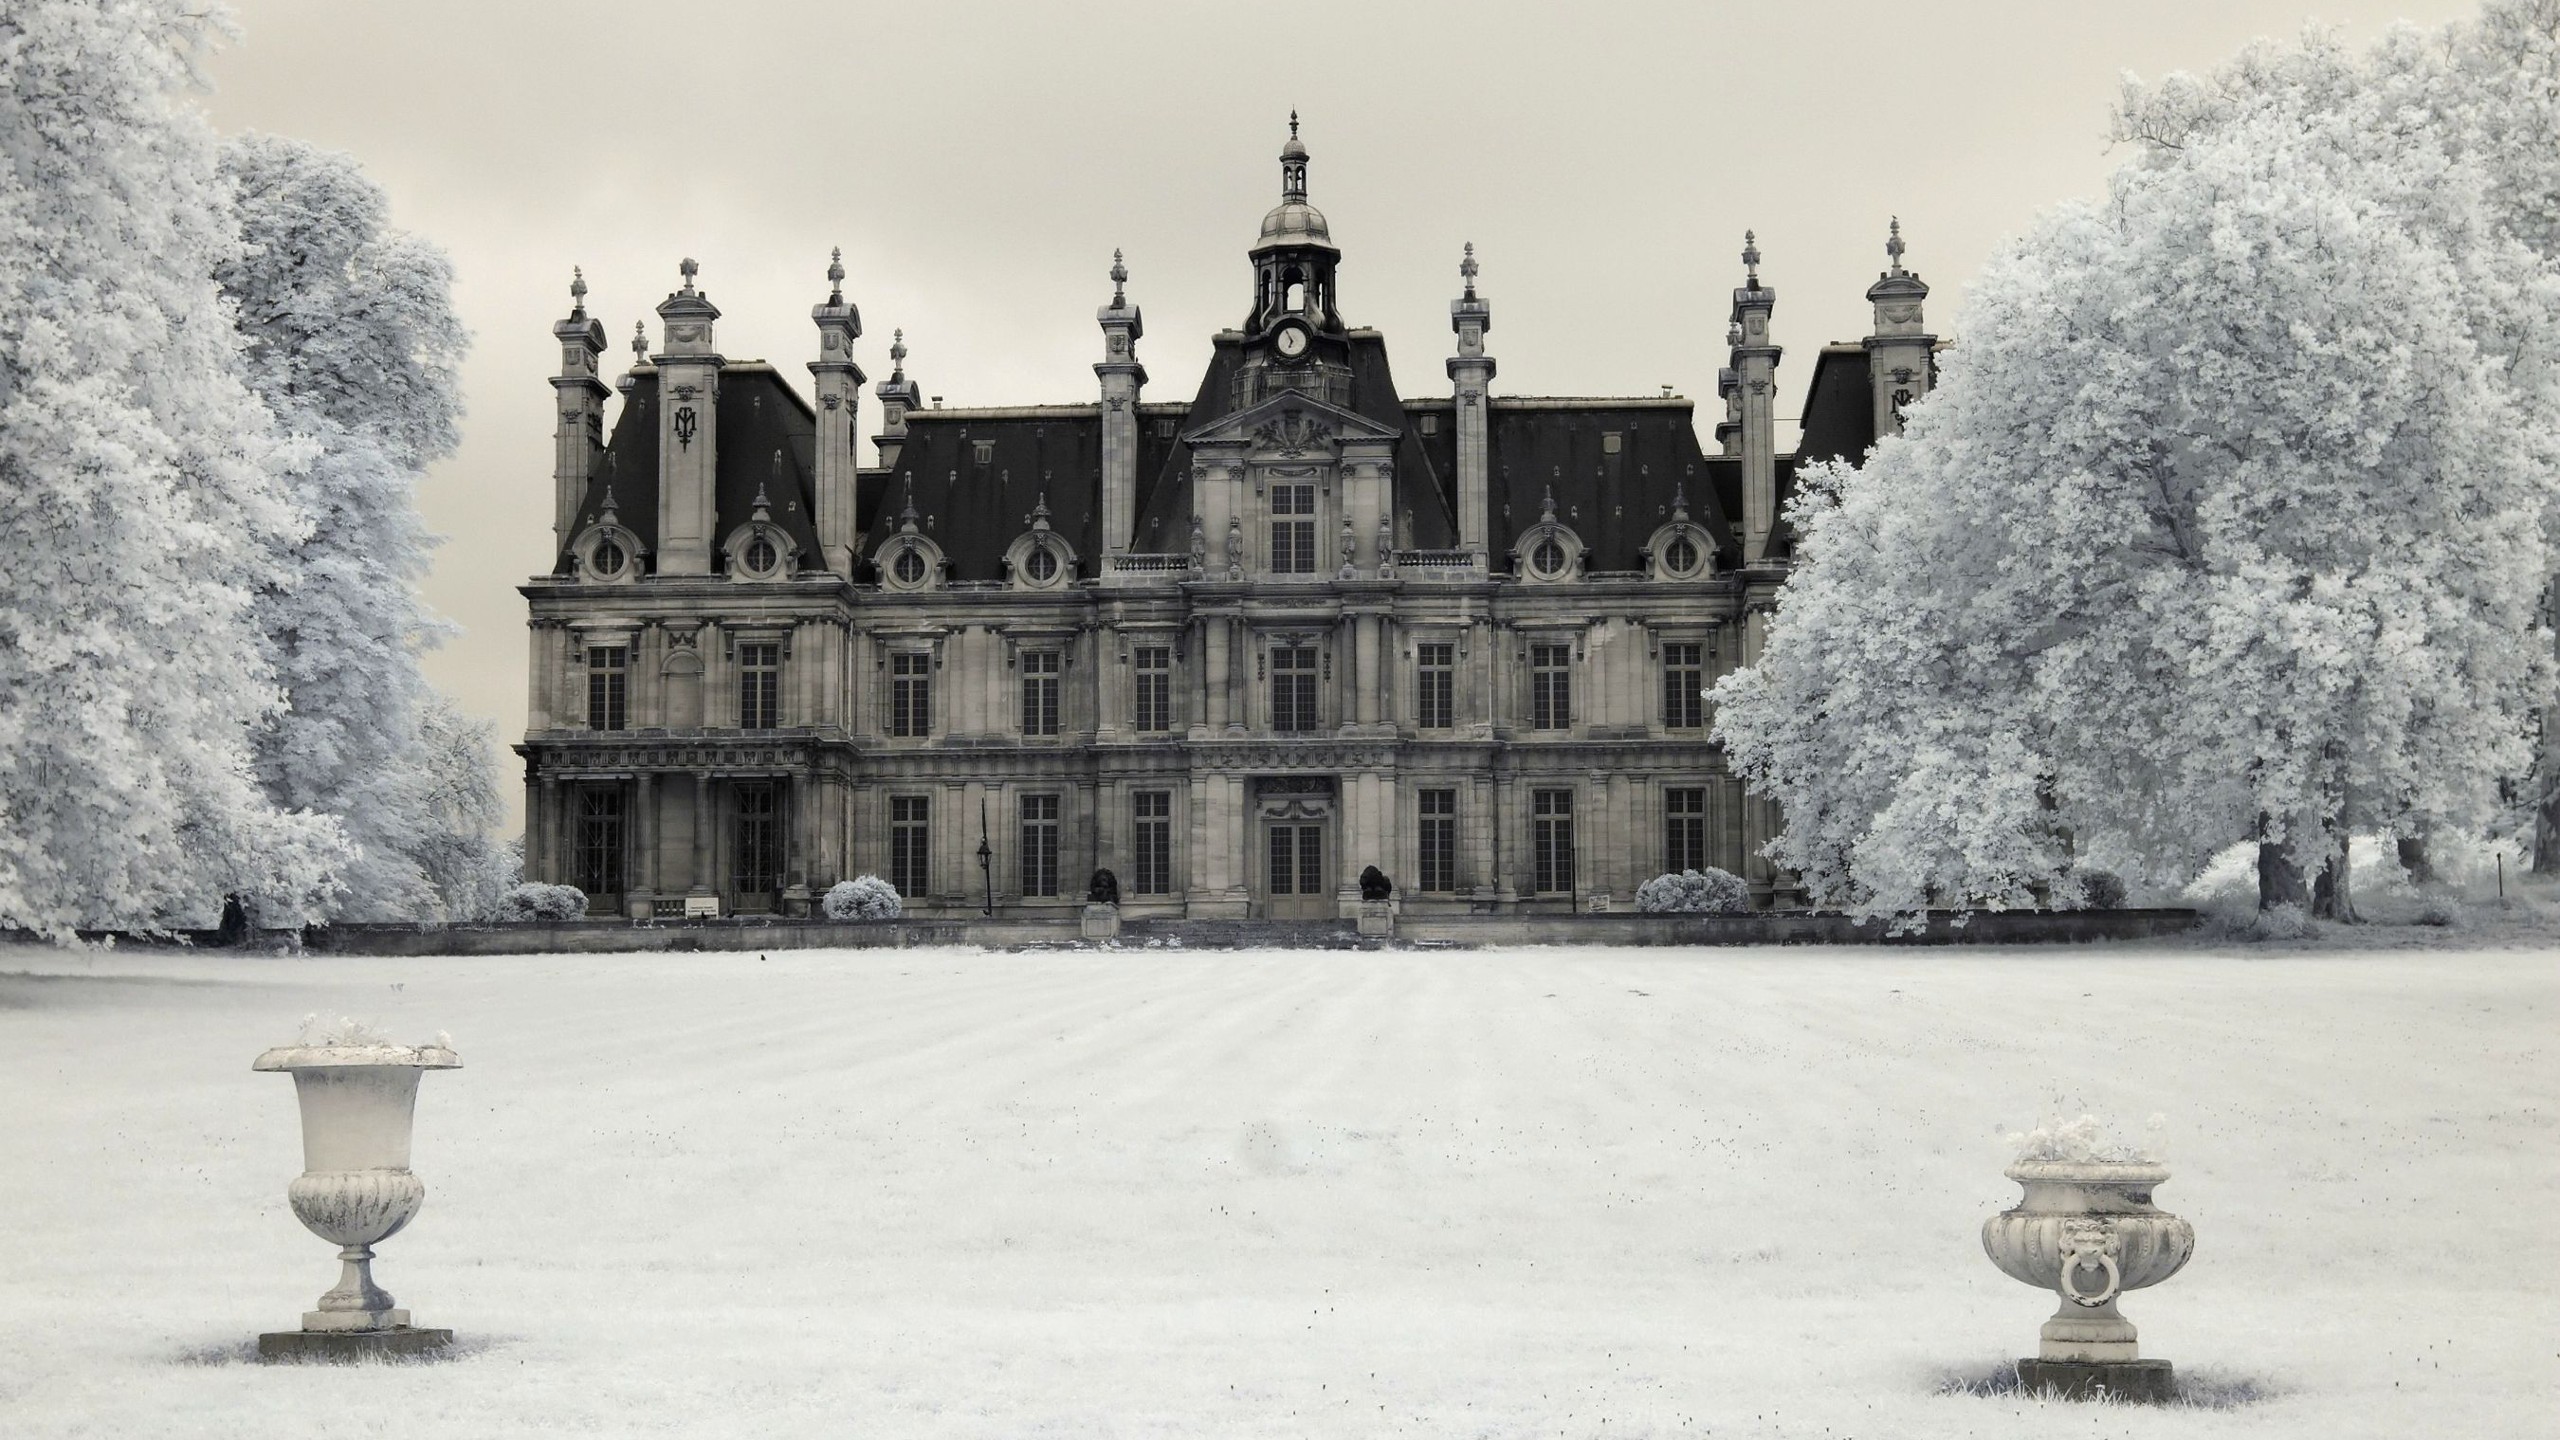 General 2560x1440 snow house trees winter mansions photo manipulation